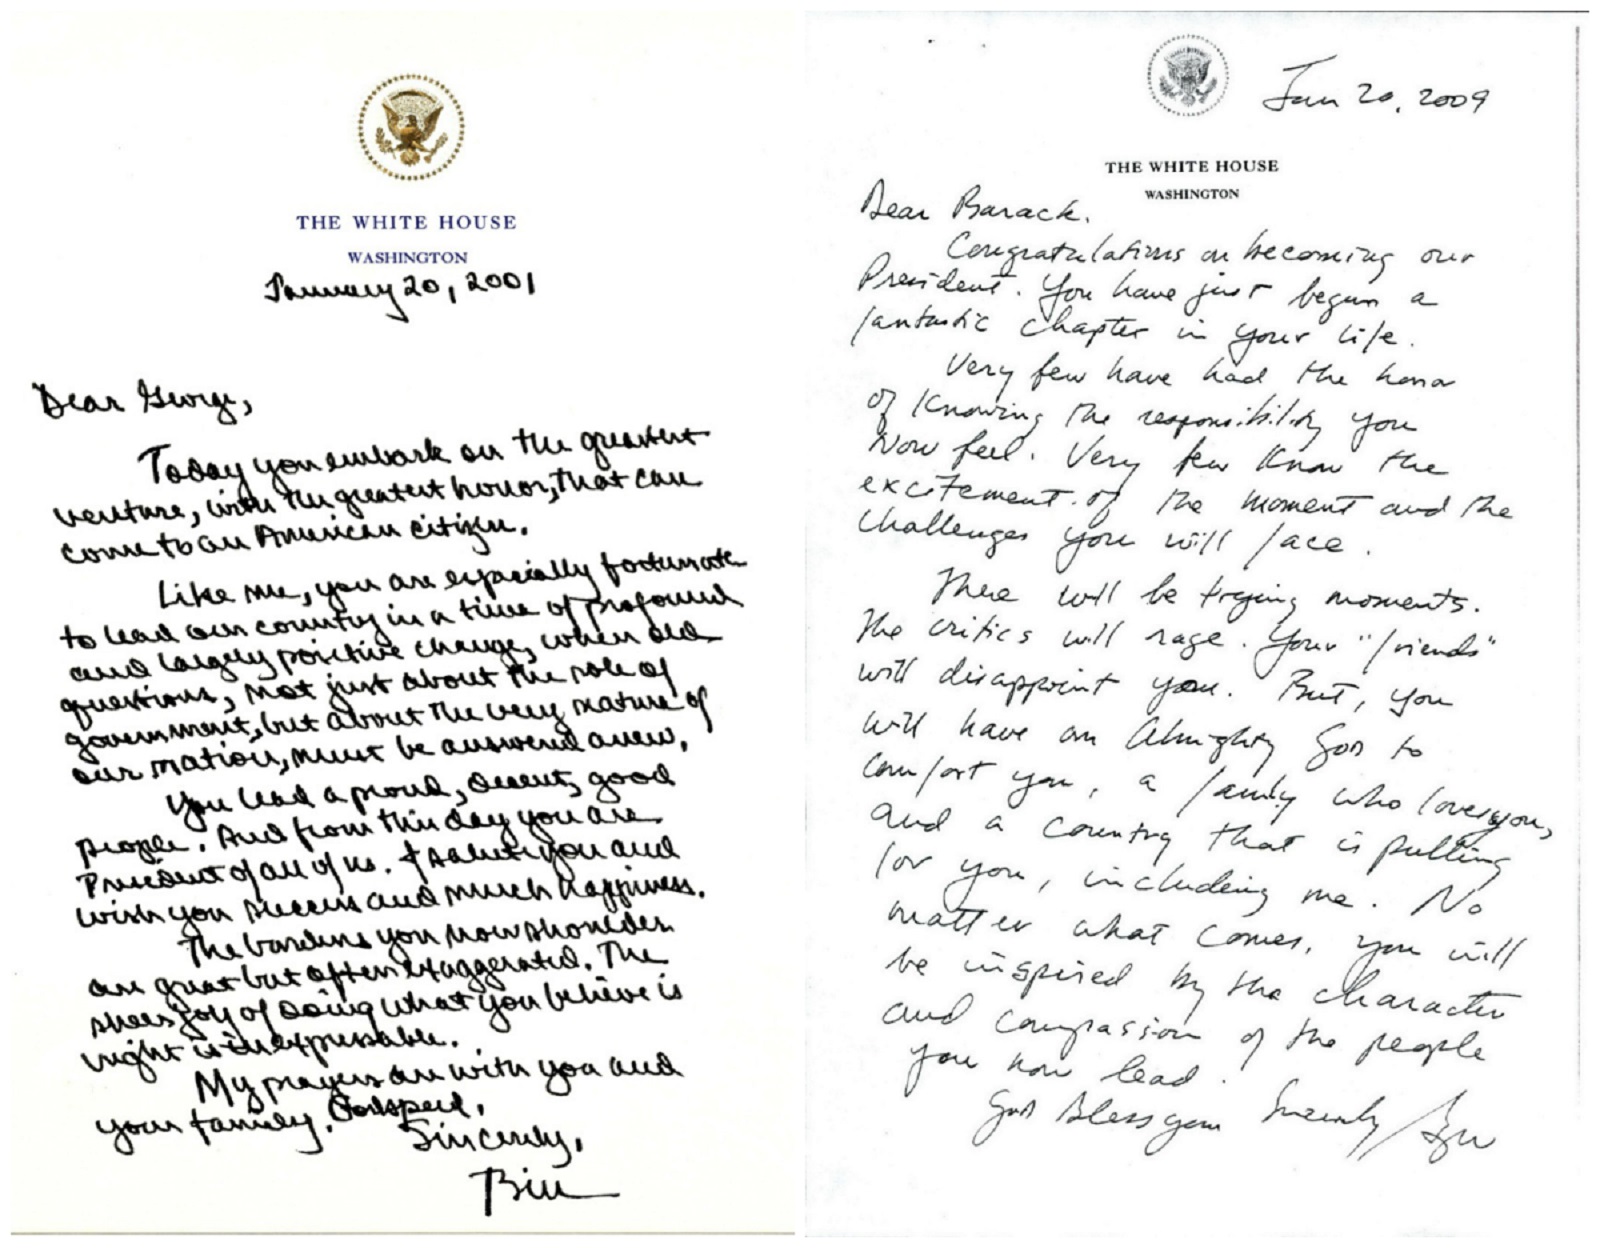 These letters from outgoing to incoming presidents show the grace